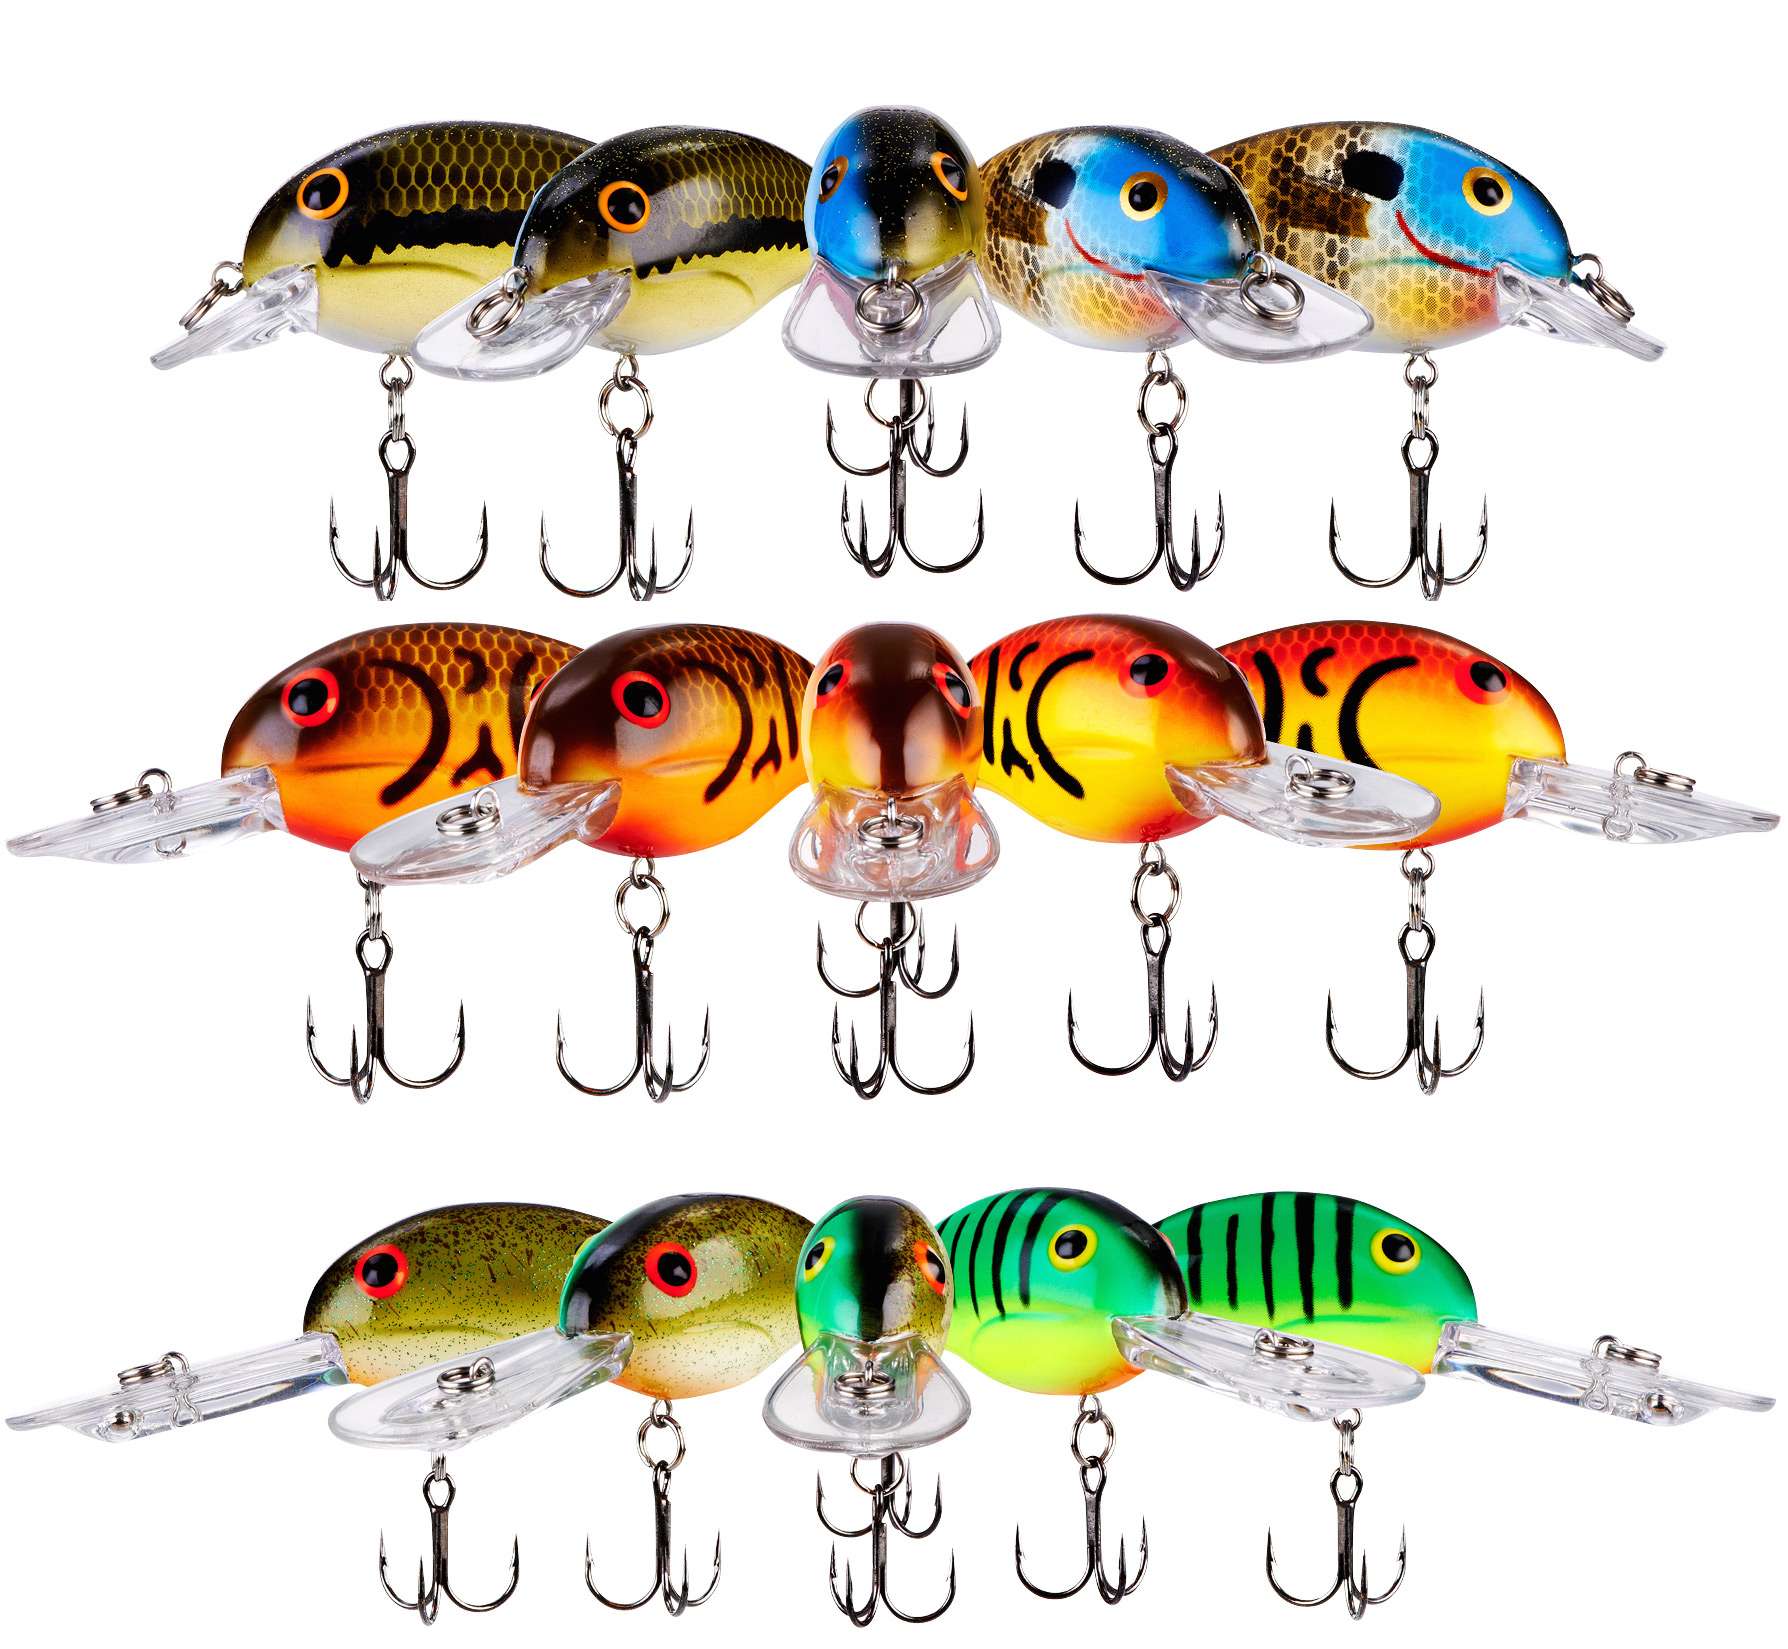 New Bass lures with patented technology - Lipless Crankbait